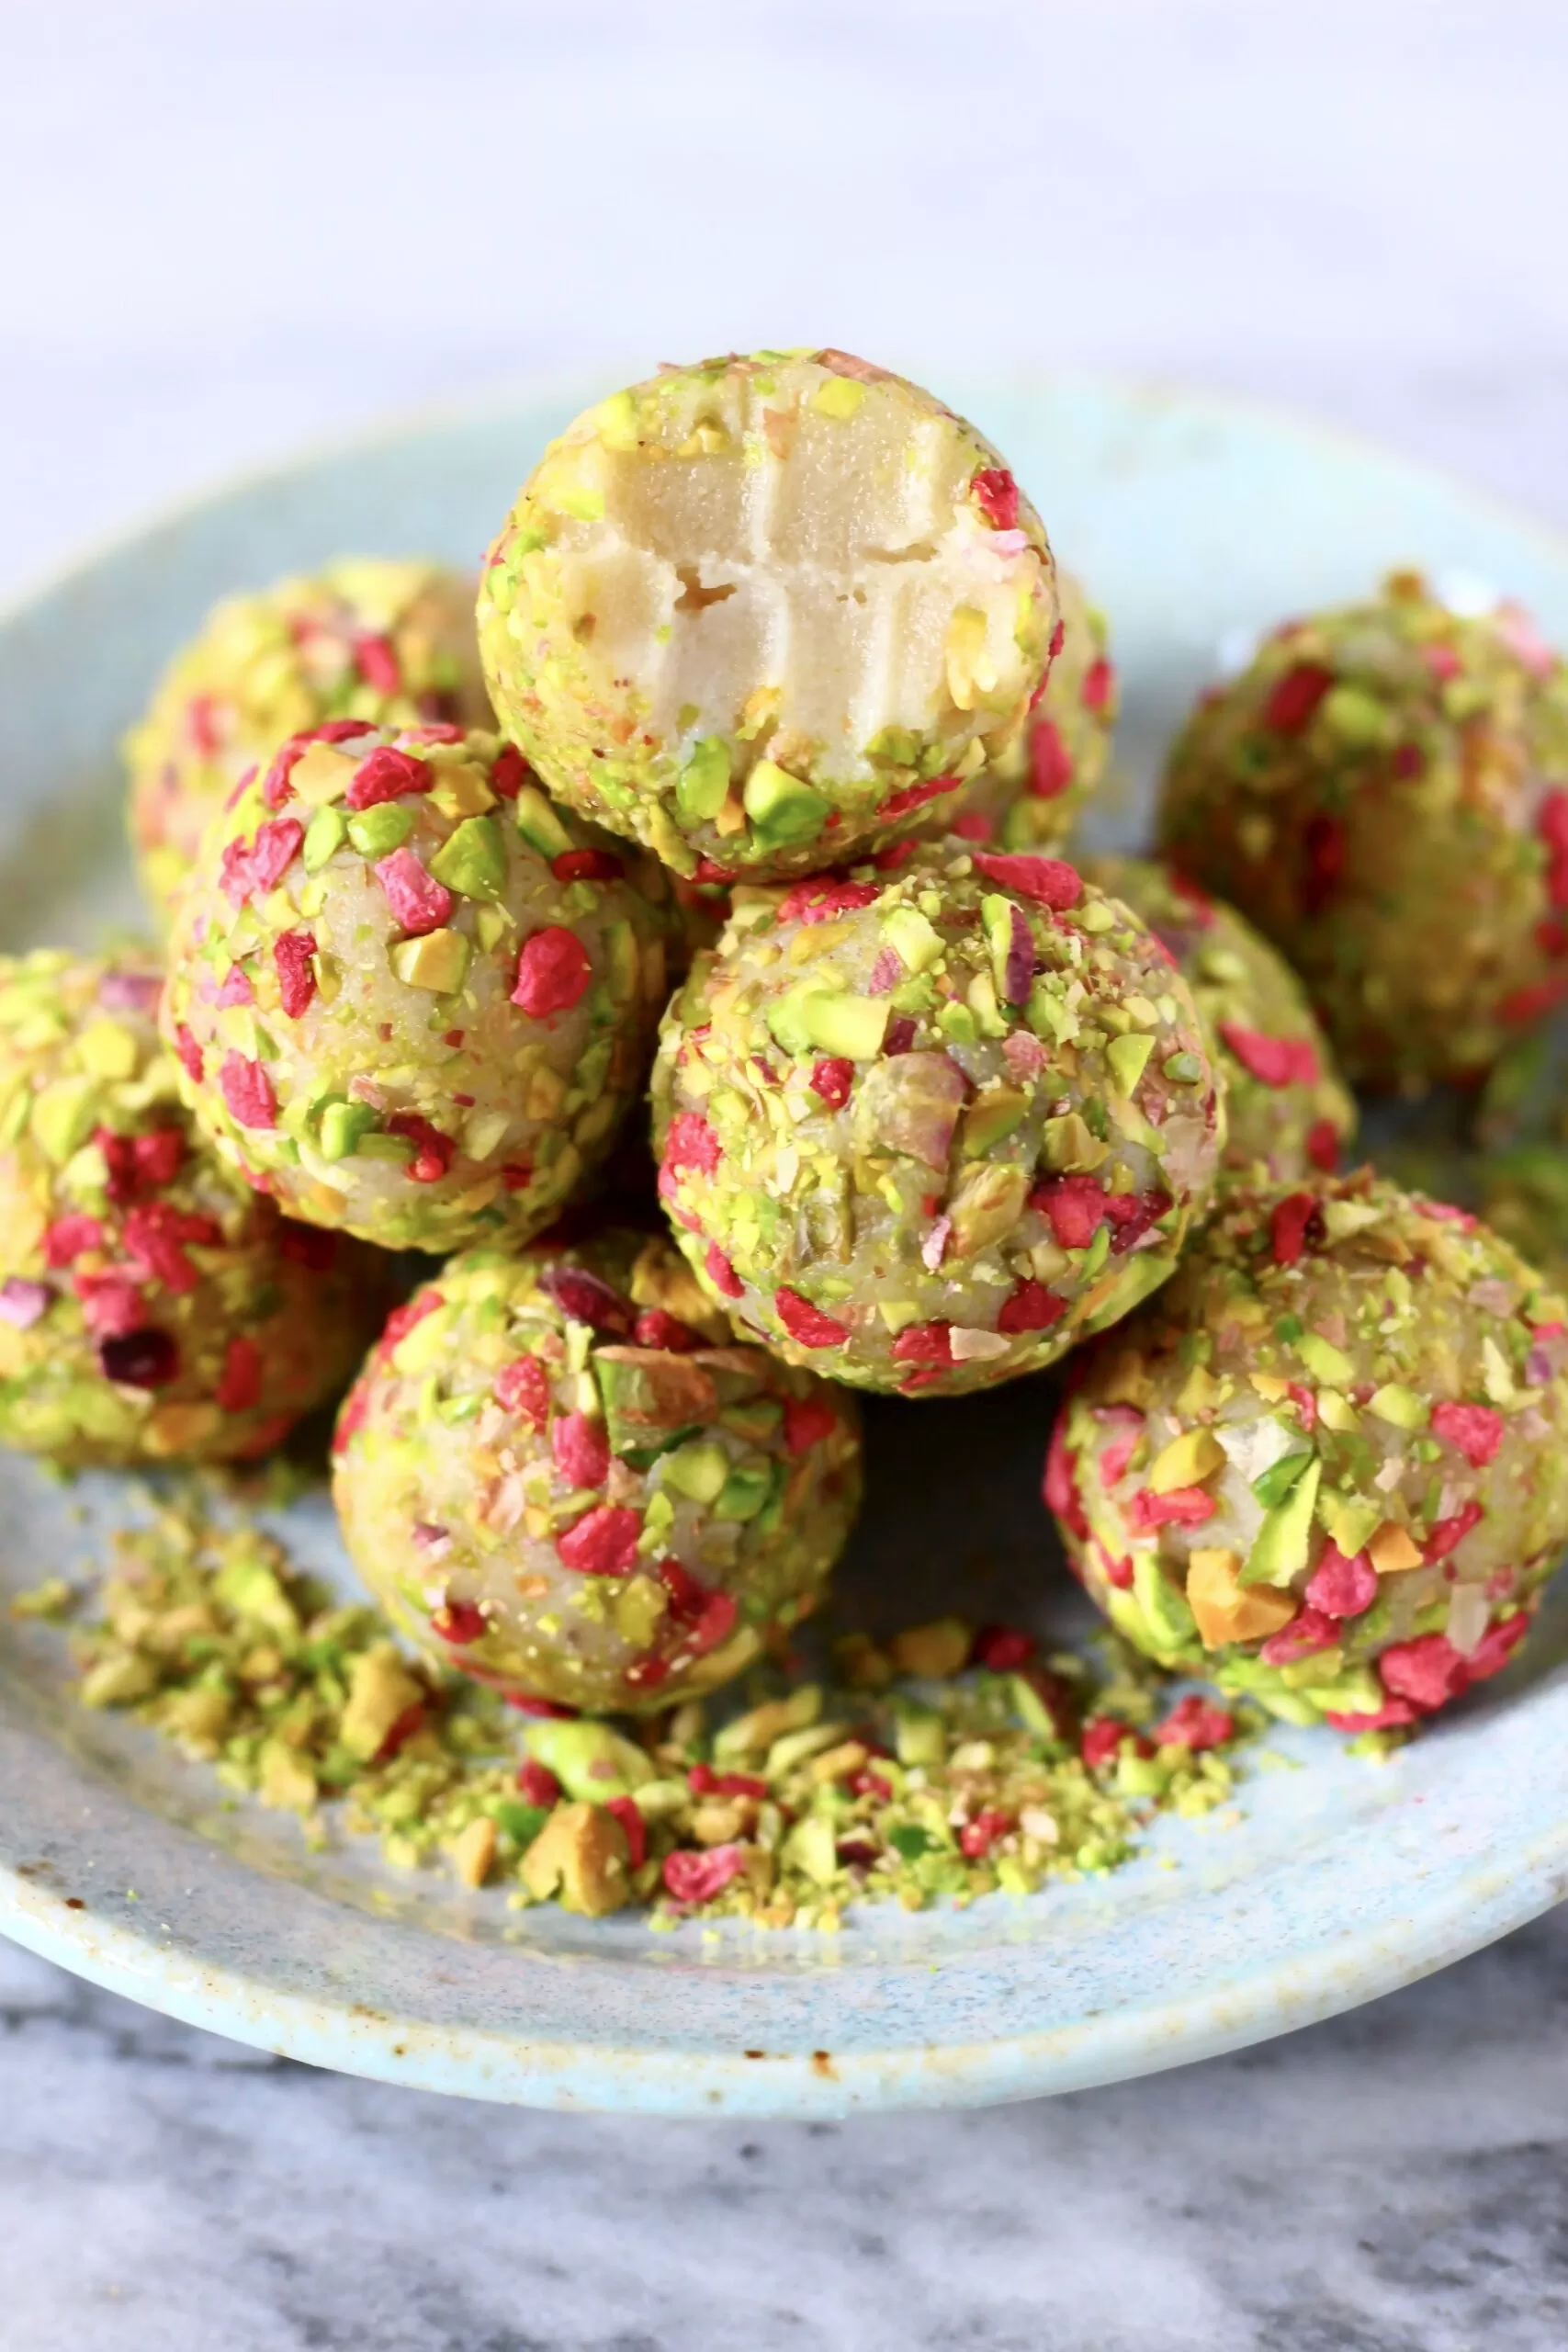 A pile of white chocolate truffles covered in chopped pistachios and freeze-dried raspberries with a bitten one on top on a light blue plate against a marble background